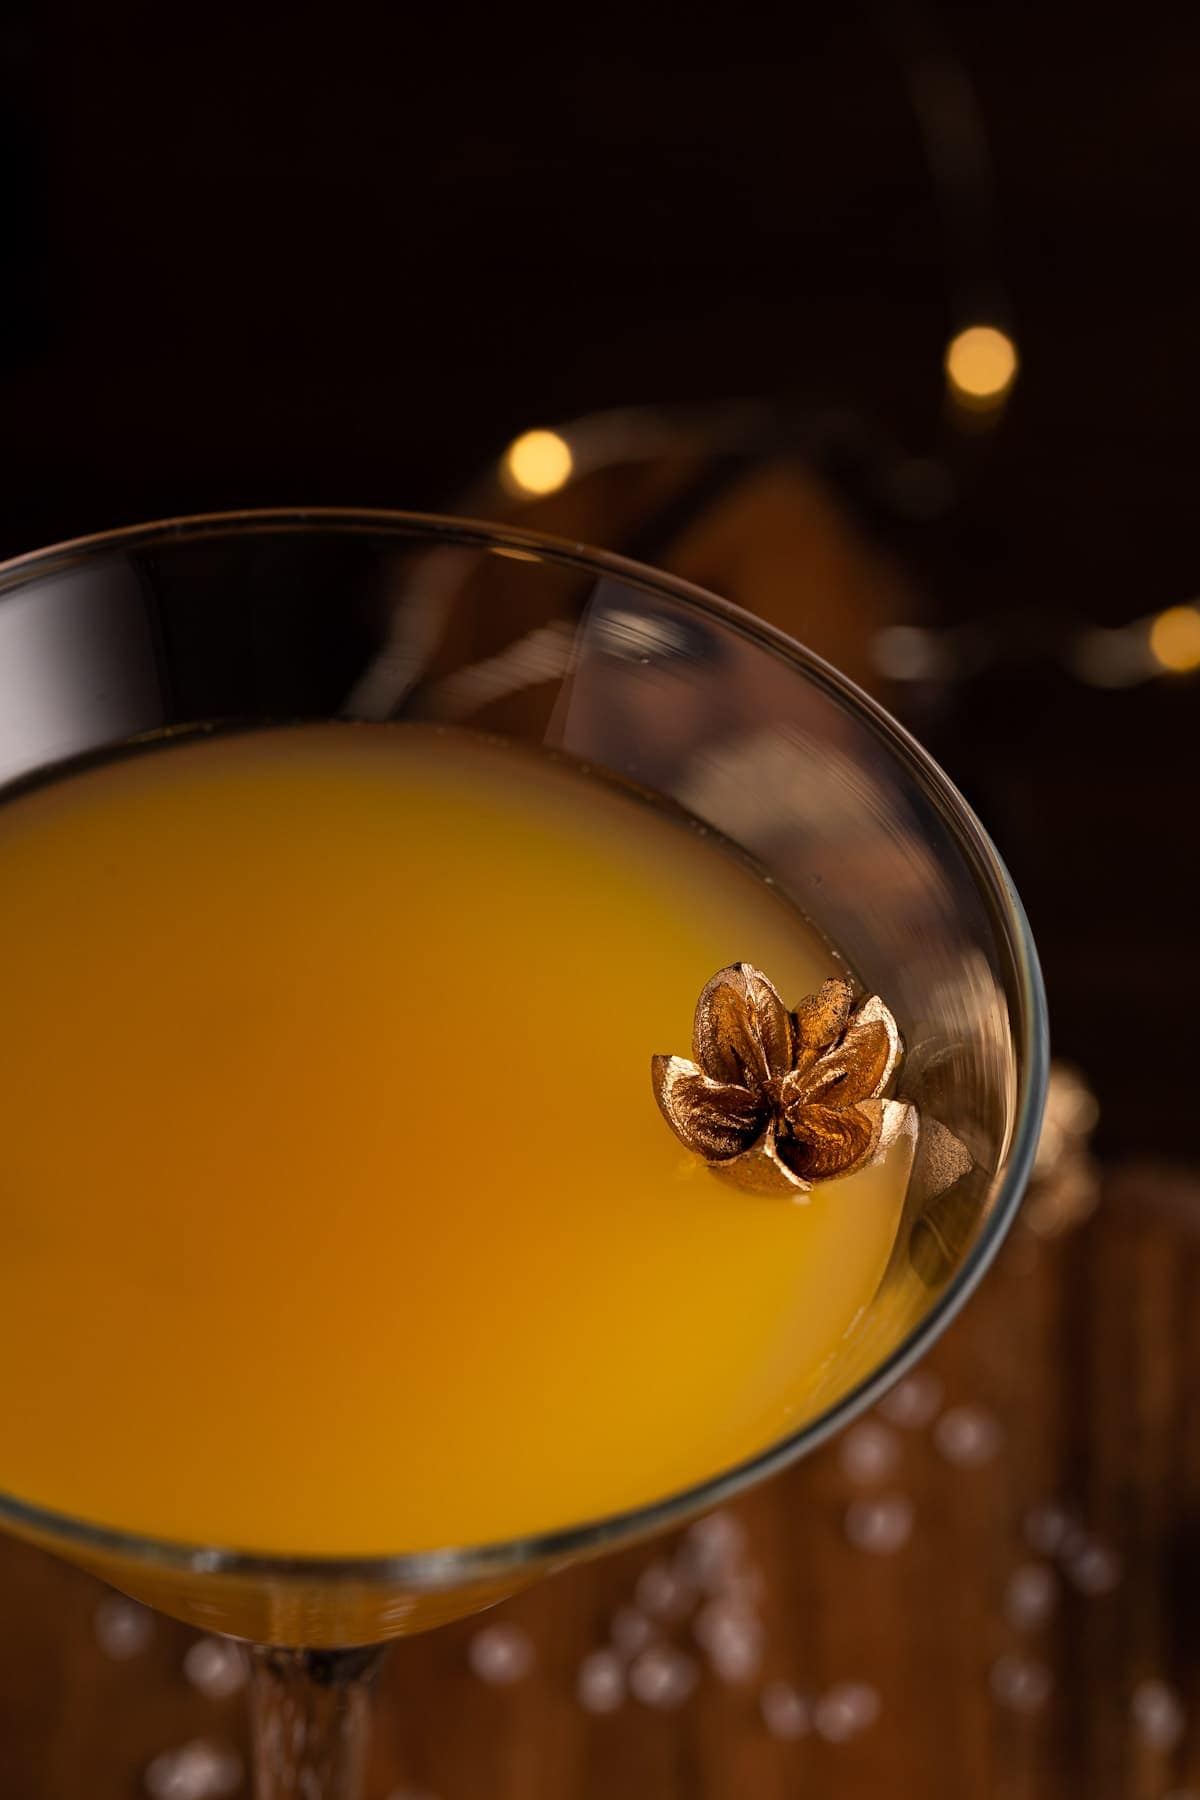 Up close view of the martini, garnished with a gold flower, on a dark, wooden background.